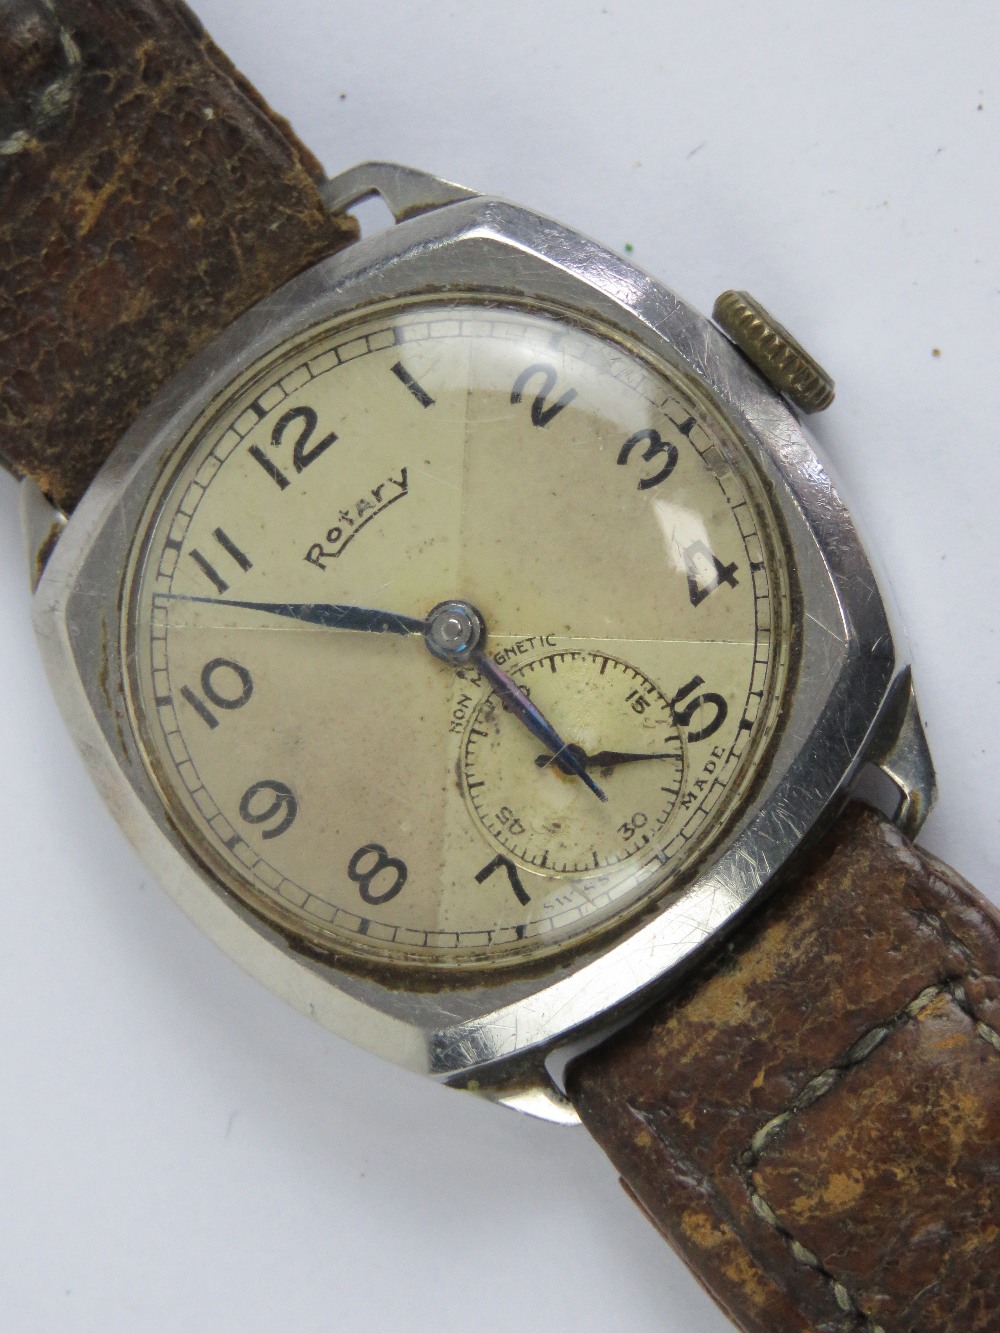 A vintage Rotary non-magnetic wristwatch